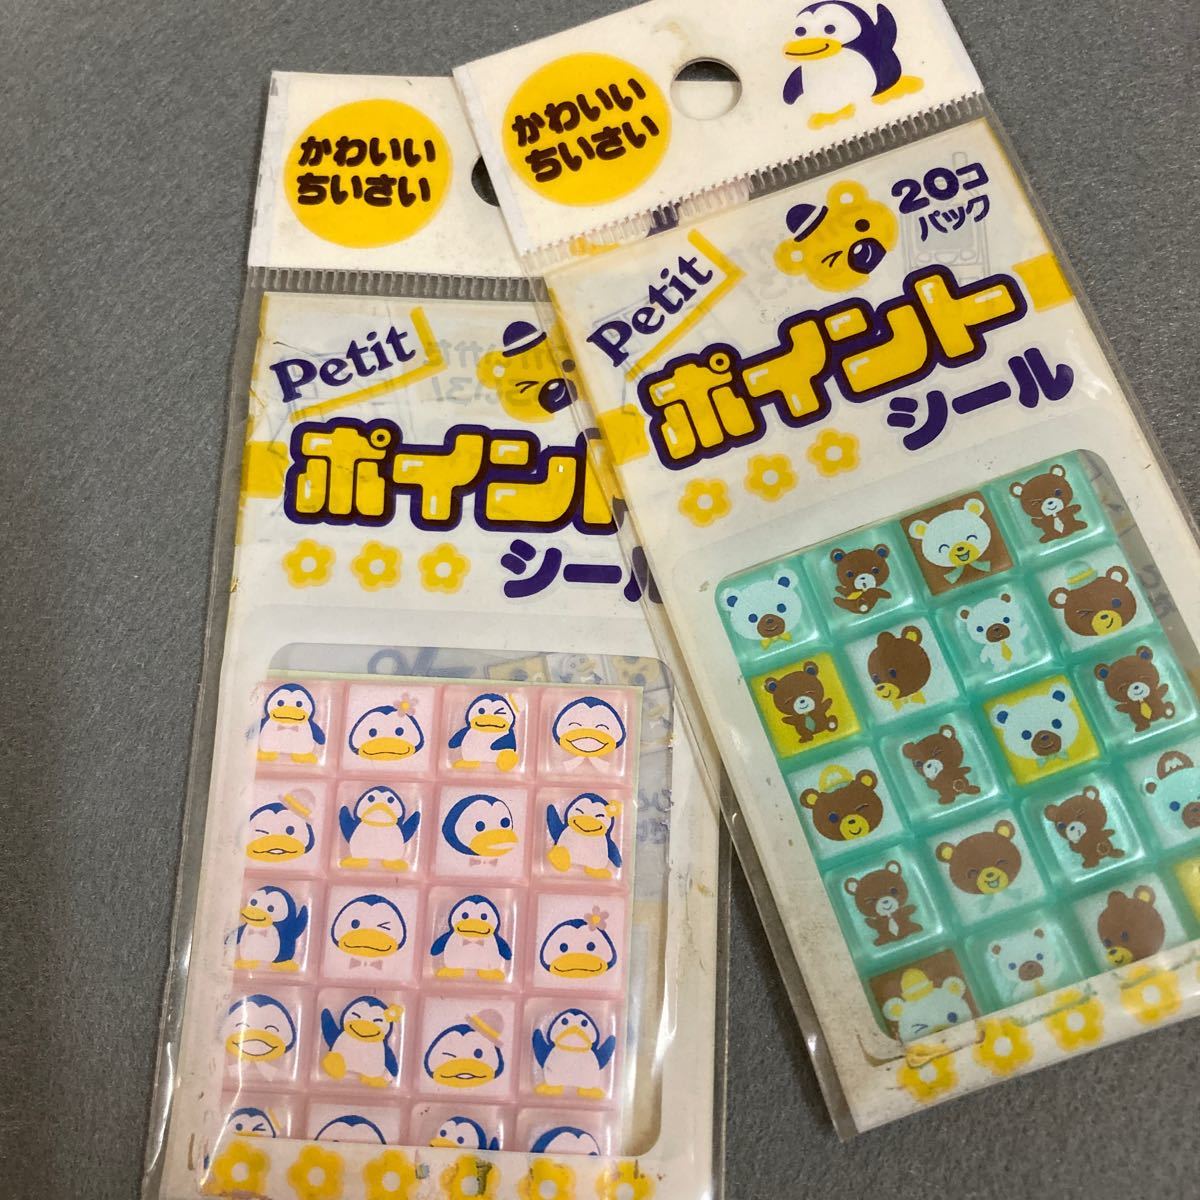  Heisei era .... seal Point seal 2 pack 1990 period that time thing unopened retro pop fancy 